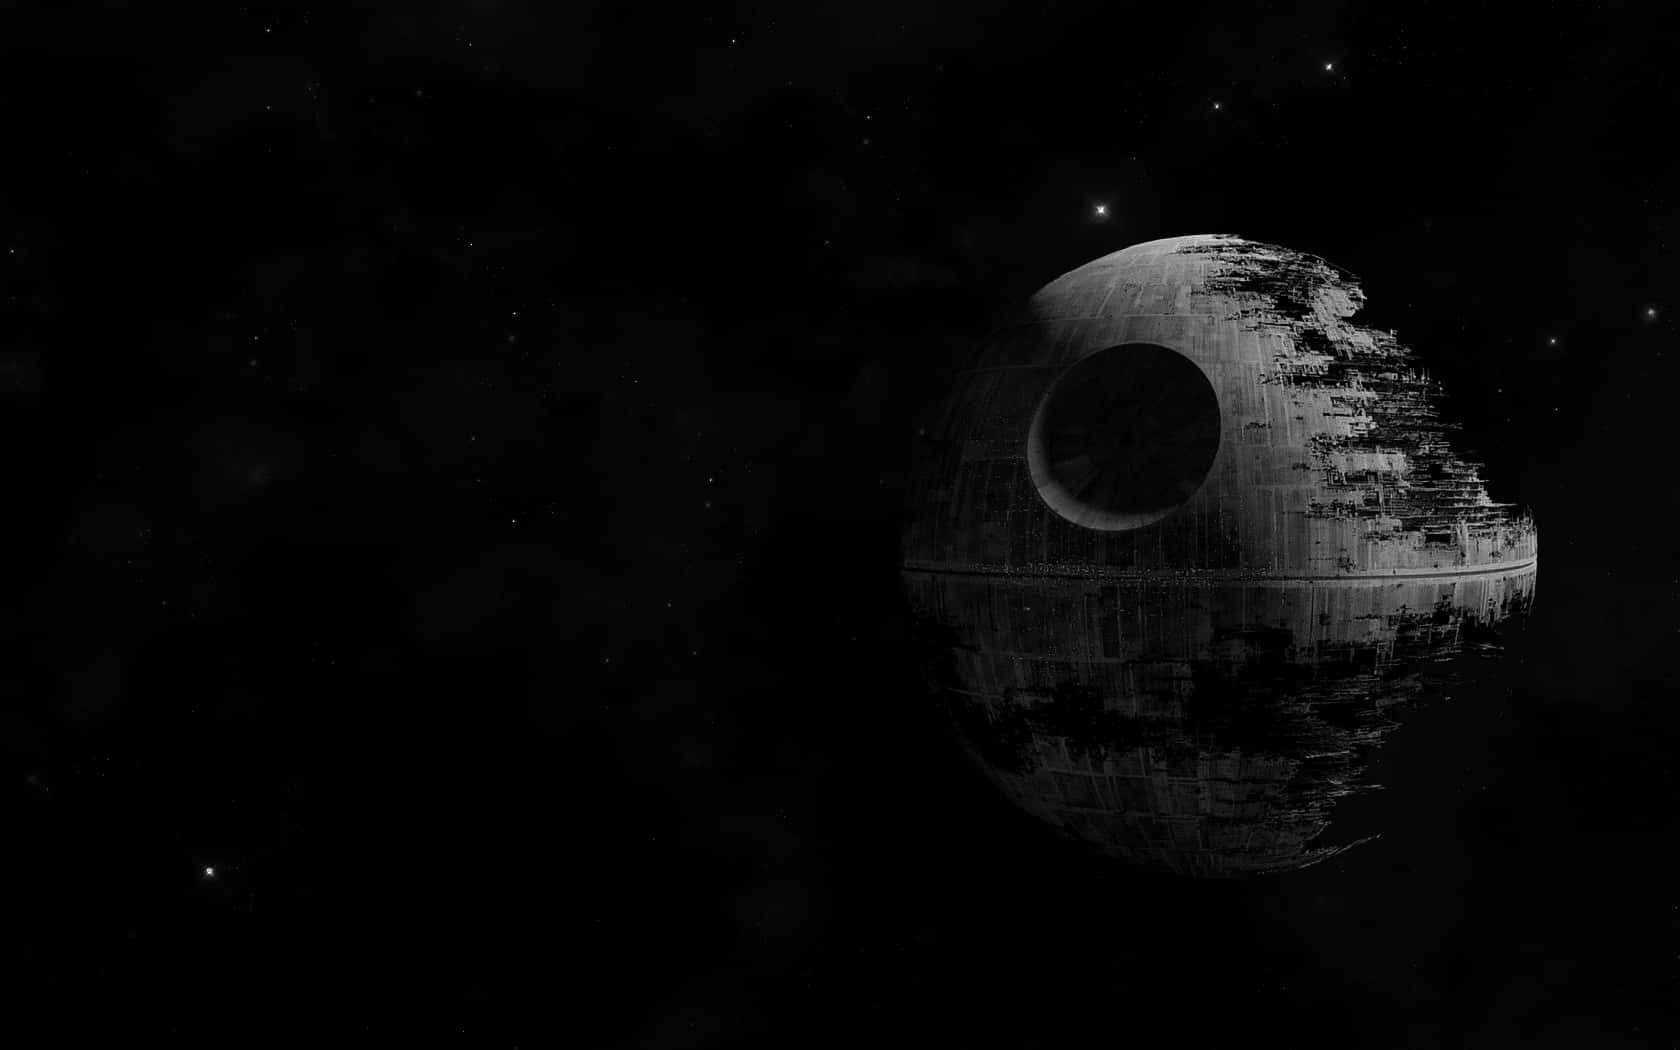 Image  Sci-fi vista of the Galactic Empire's iconic Death Star